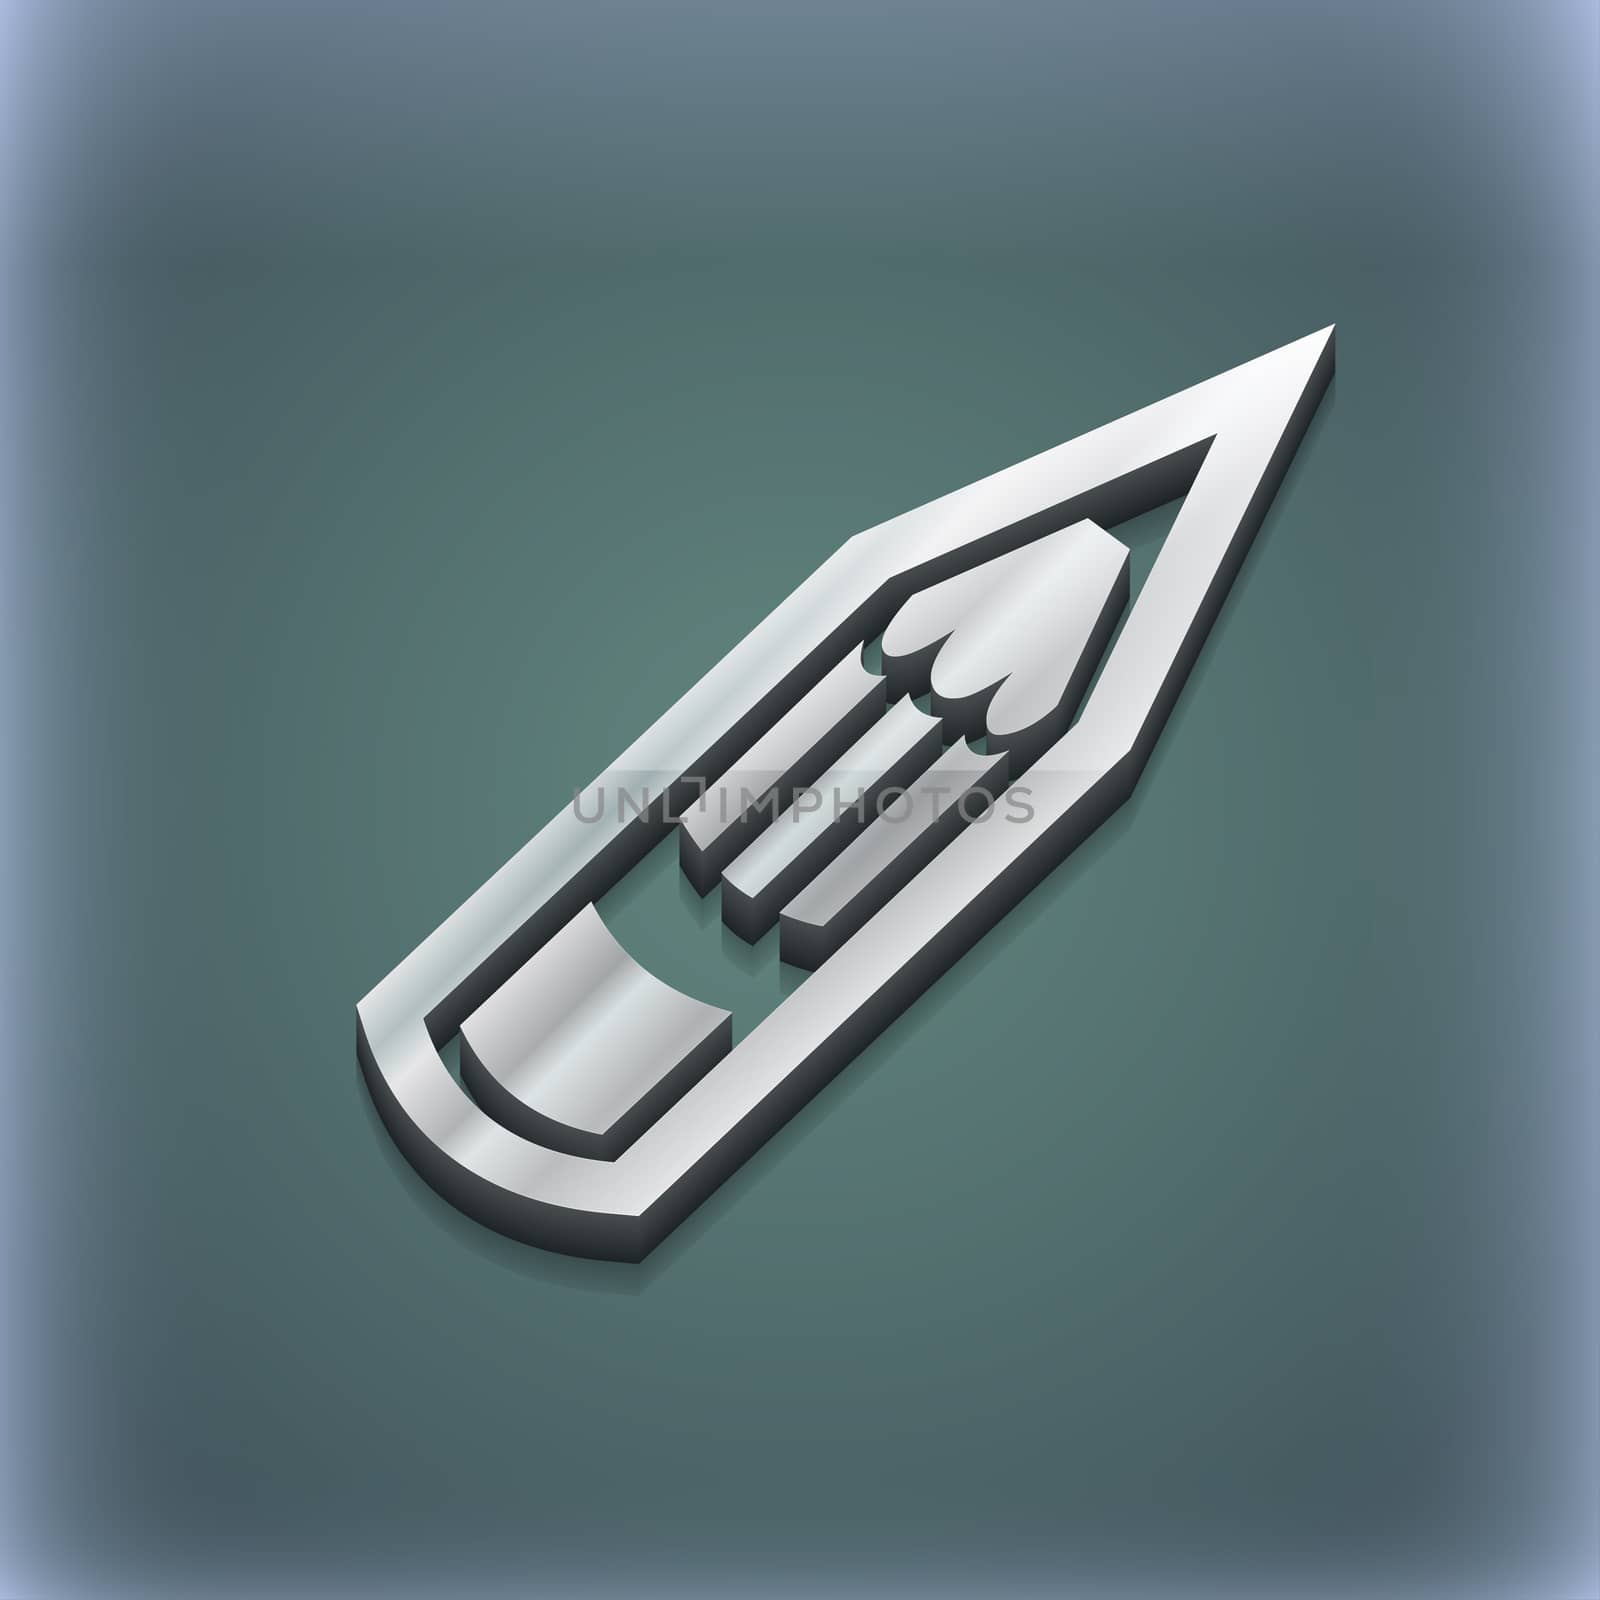 Pencil icon symbol. 3D style. Trendy, modern design with space for your text illustration. Raster version